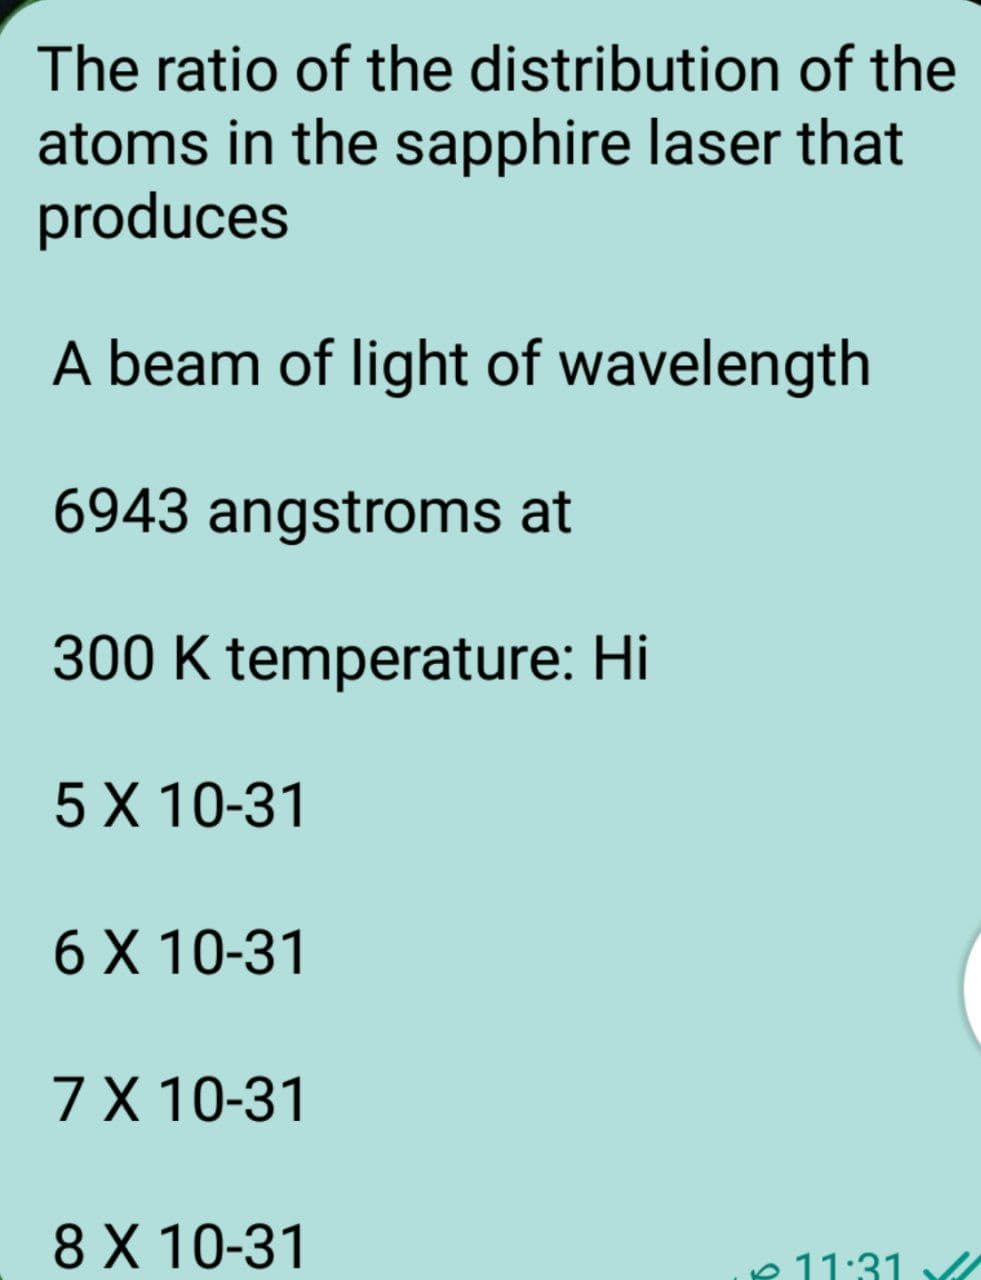 The ratio of the
distribution
of the
atoms in the sapphire laser that
produces
A beam of light of wavelength
6943 angstroms at
300 K temperature: Hi
5 X 10-31
6 X 10-31
7 X 10-31
8 X 10-31
11:31